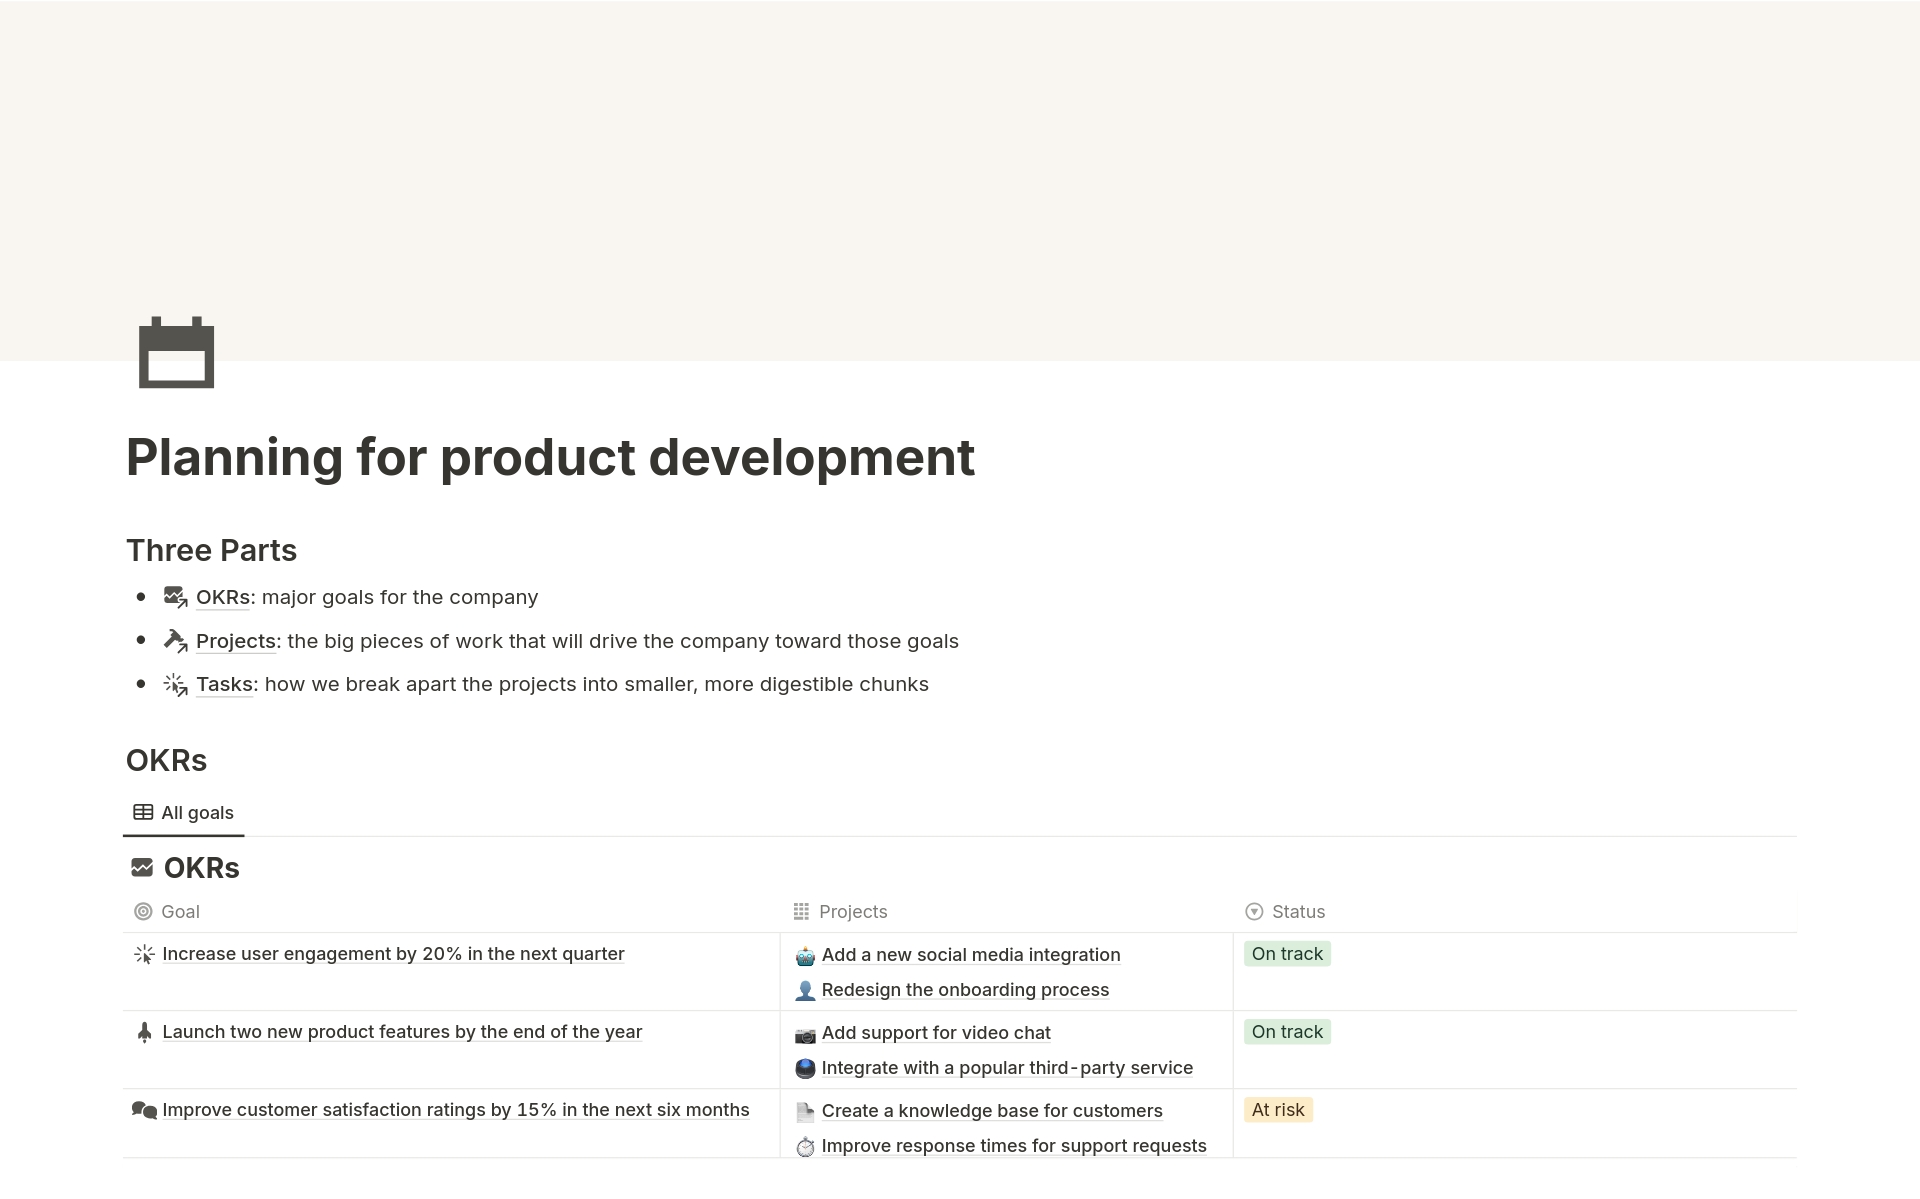 Plan your product development by connecting your OKRs, projects, and tasks.